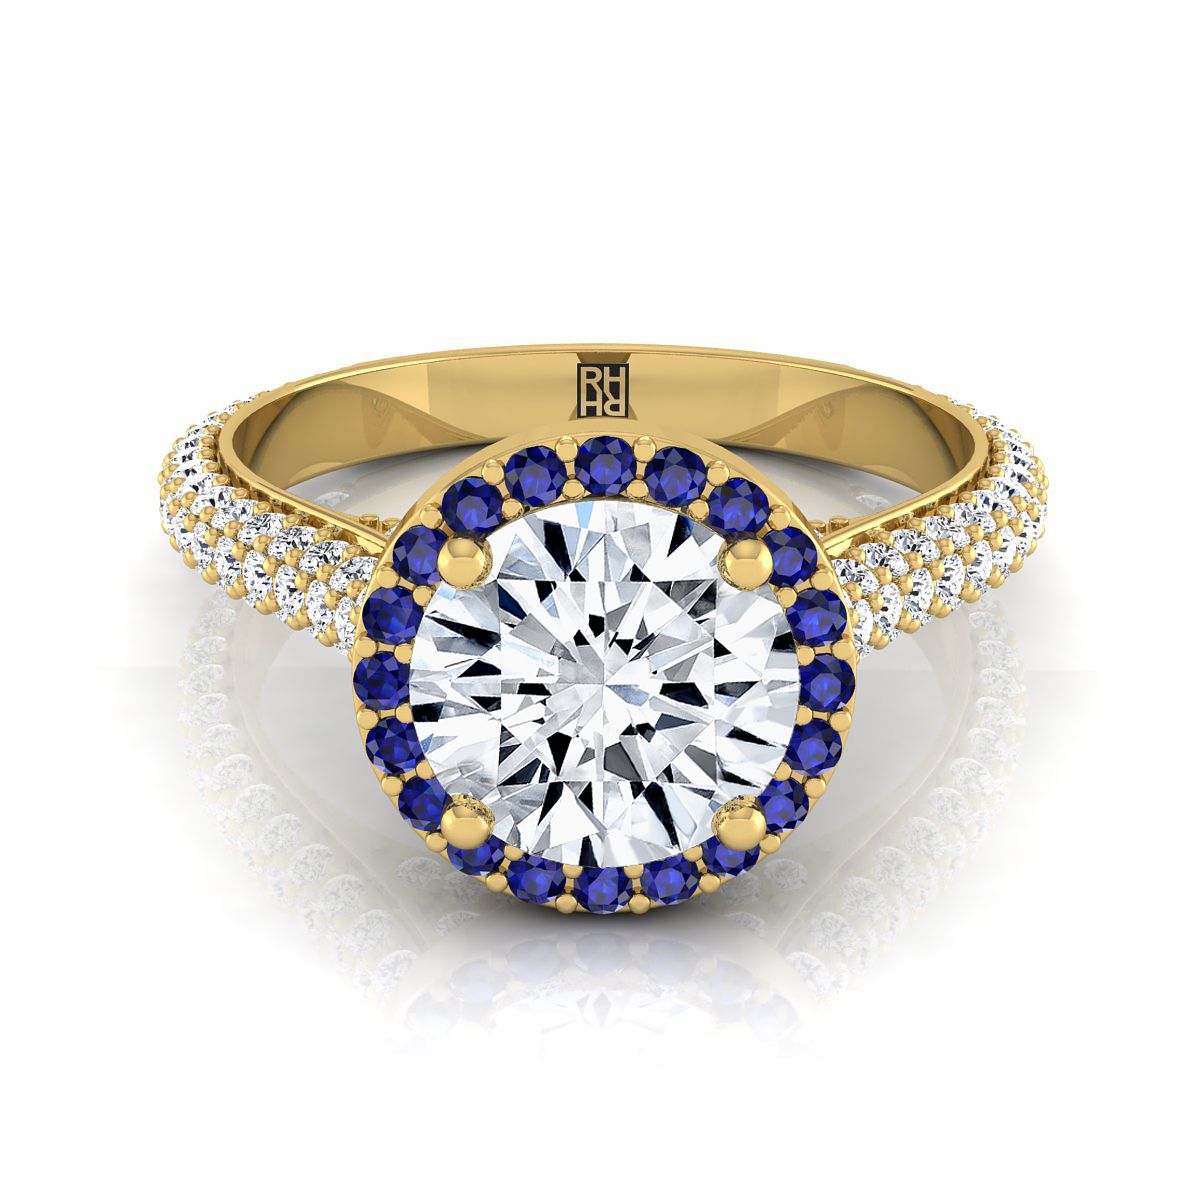 14K Yellow Gold Round Brilliant  Micro-Pavé Halo With Pave Side Diamond Engagement Ring -7/8ctw